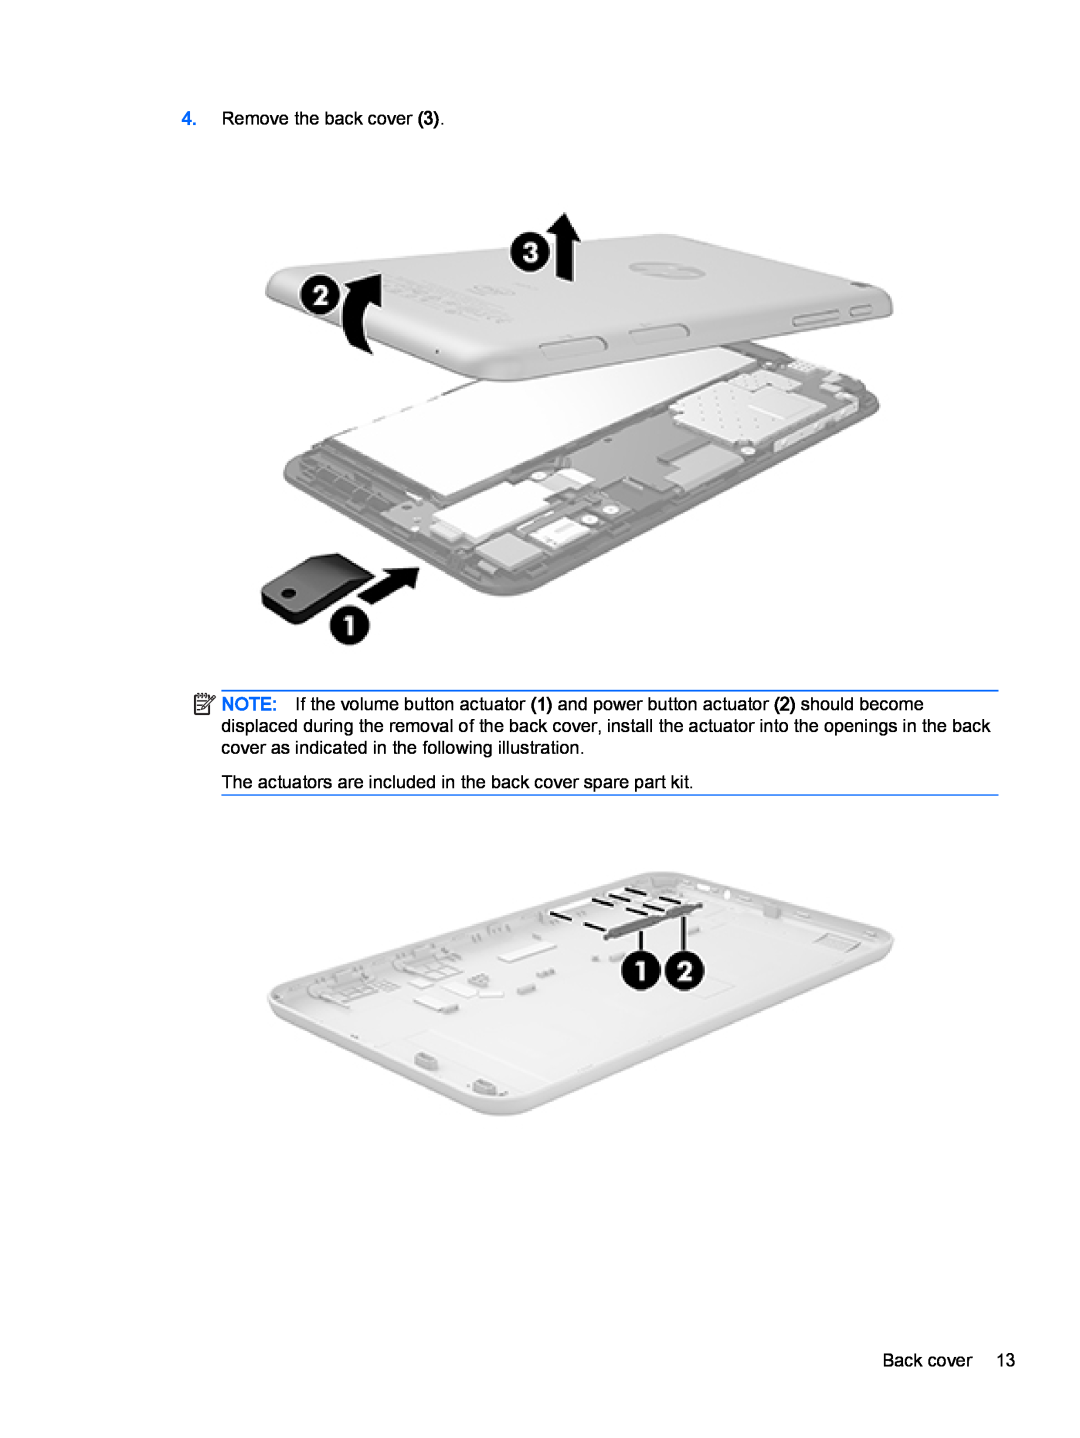 HP 7 Plus G2 - 1331 manual Remove the back cover, The actuators are included in the back cover spare part kit, Back cover 